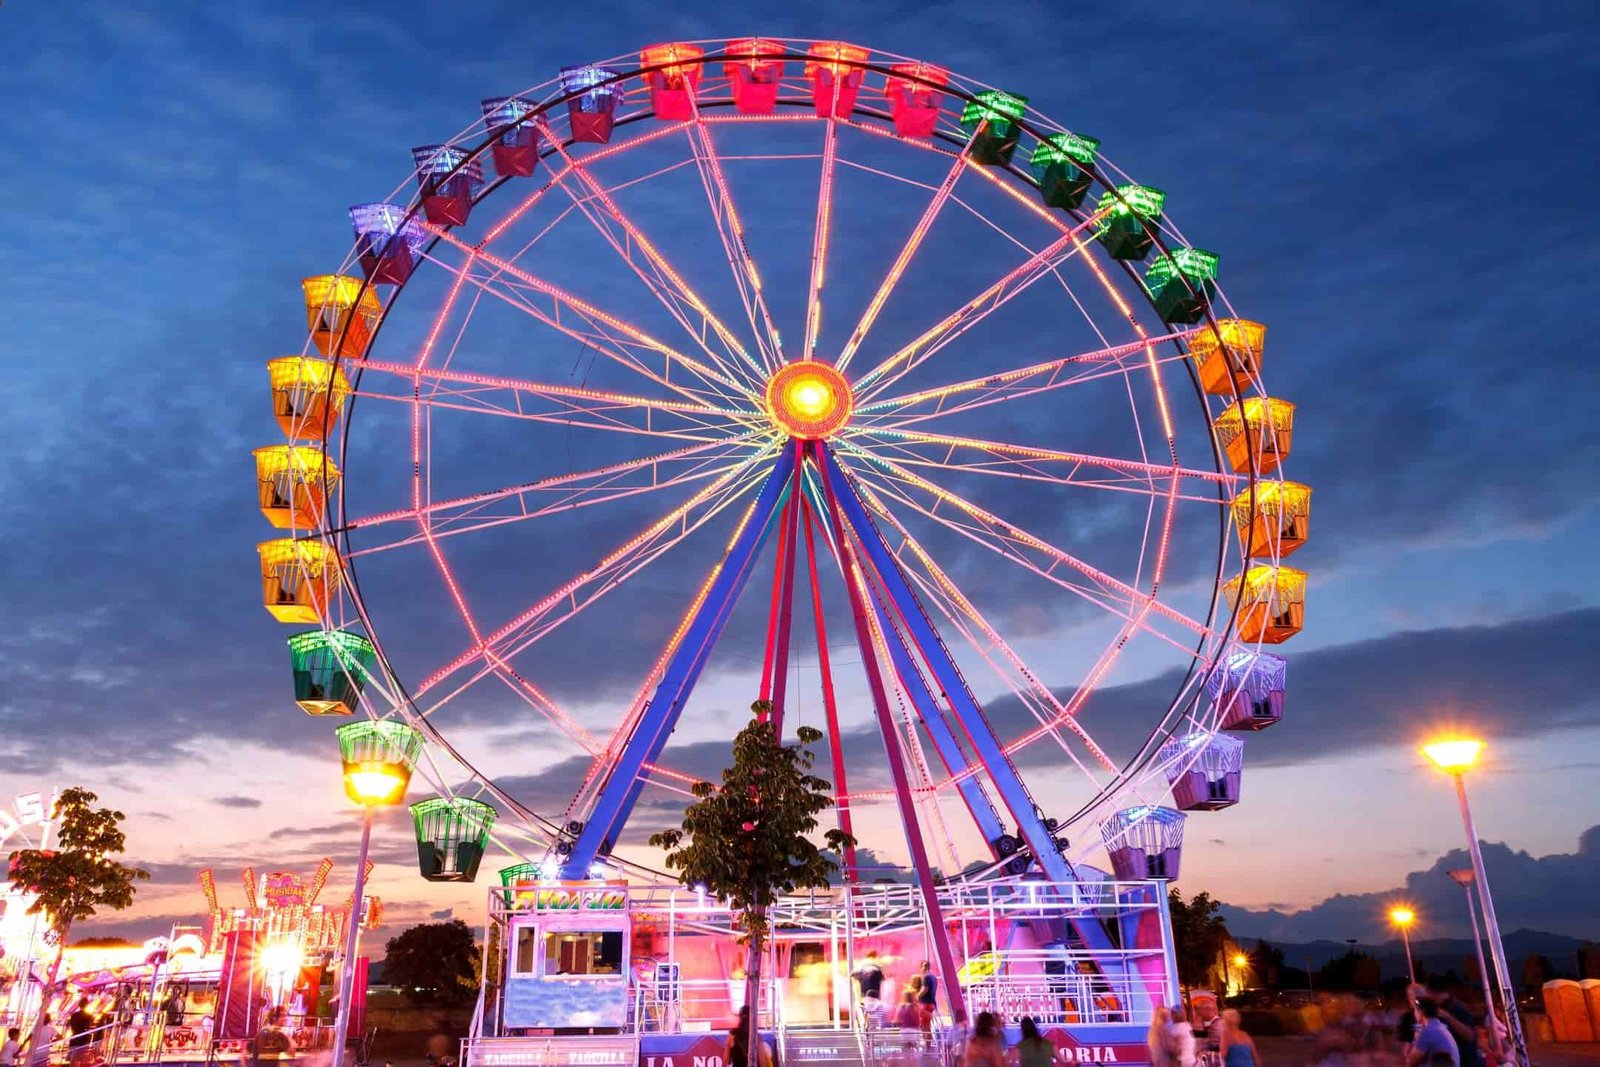 The Ferris Wheel A Classic Experience with Spectacular Views